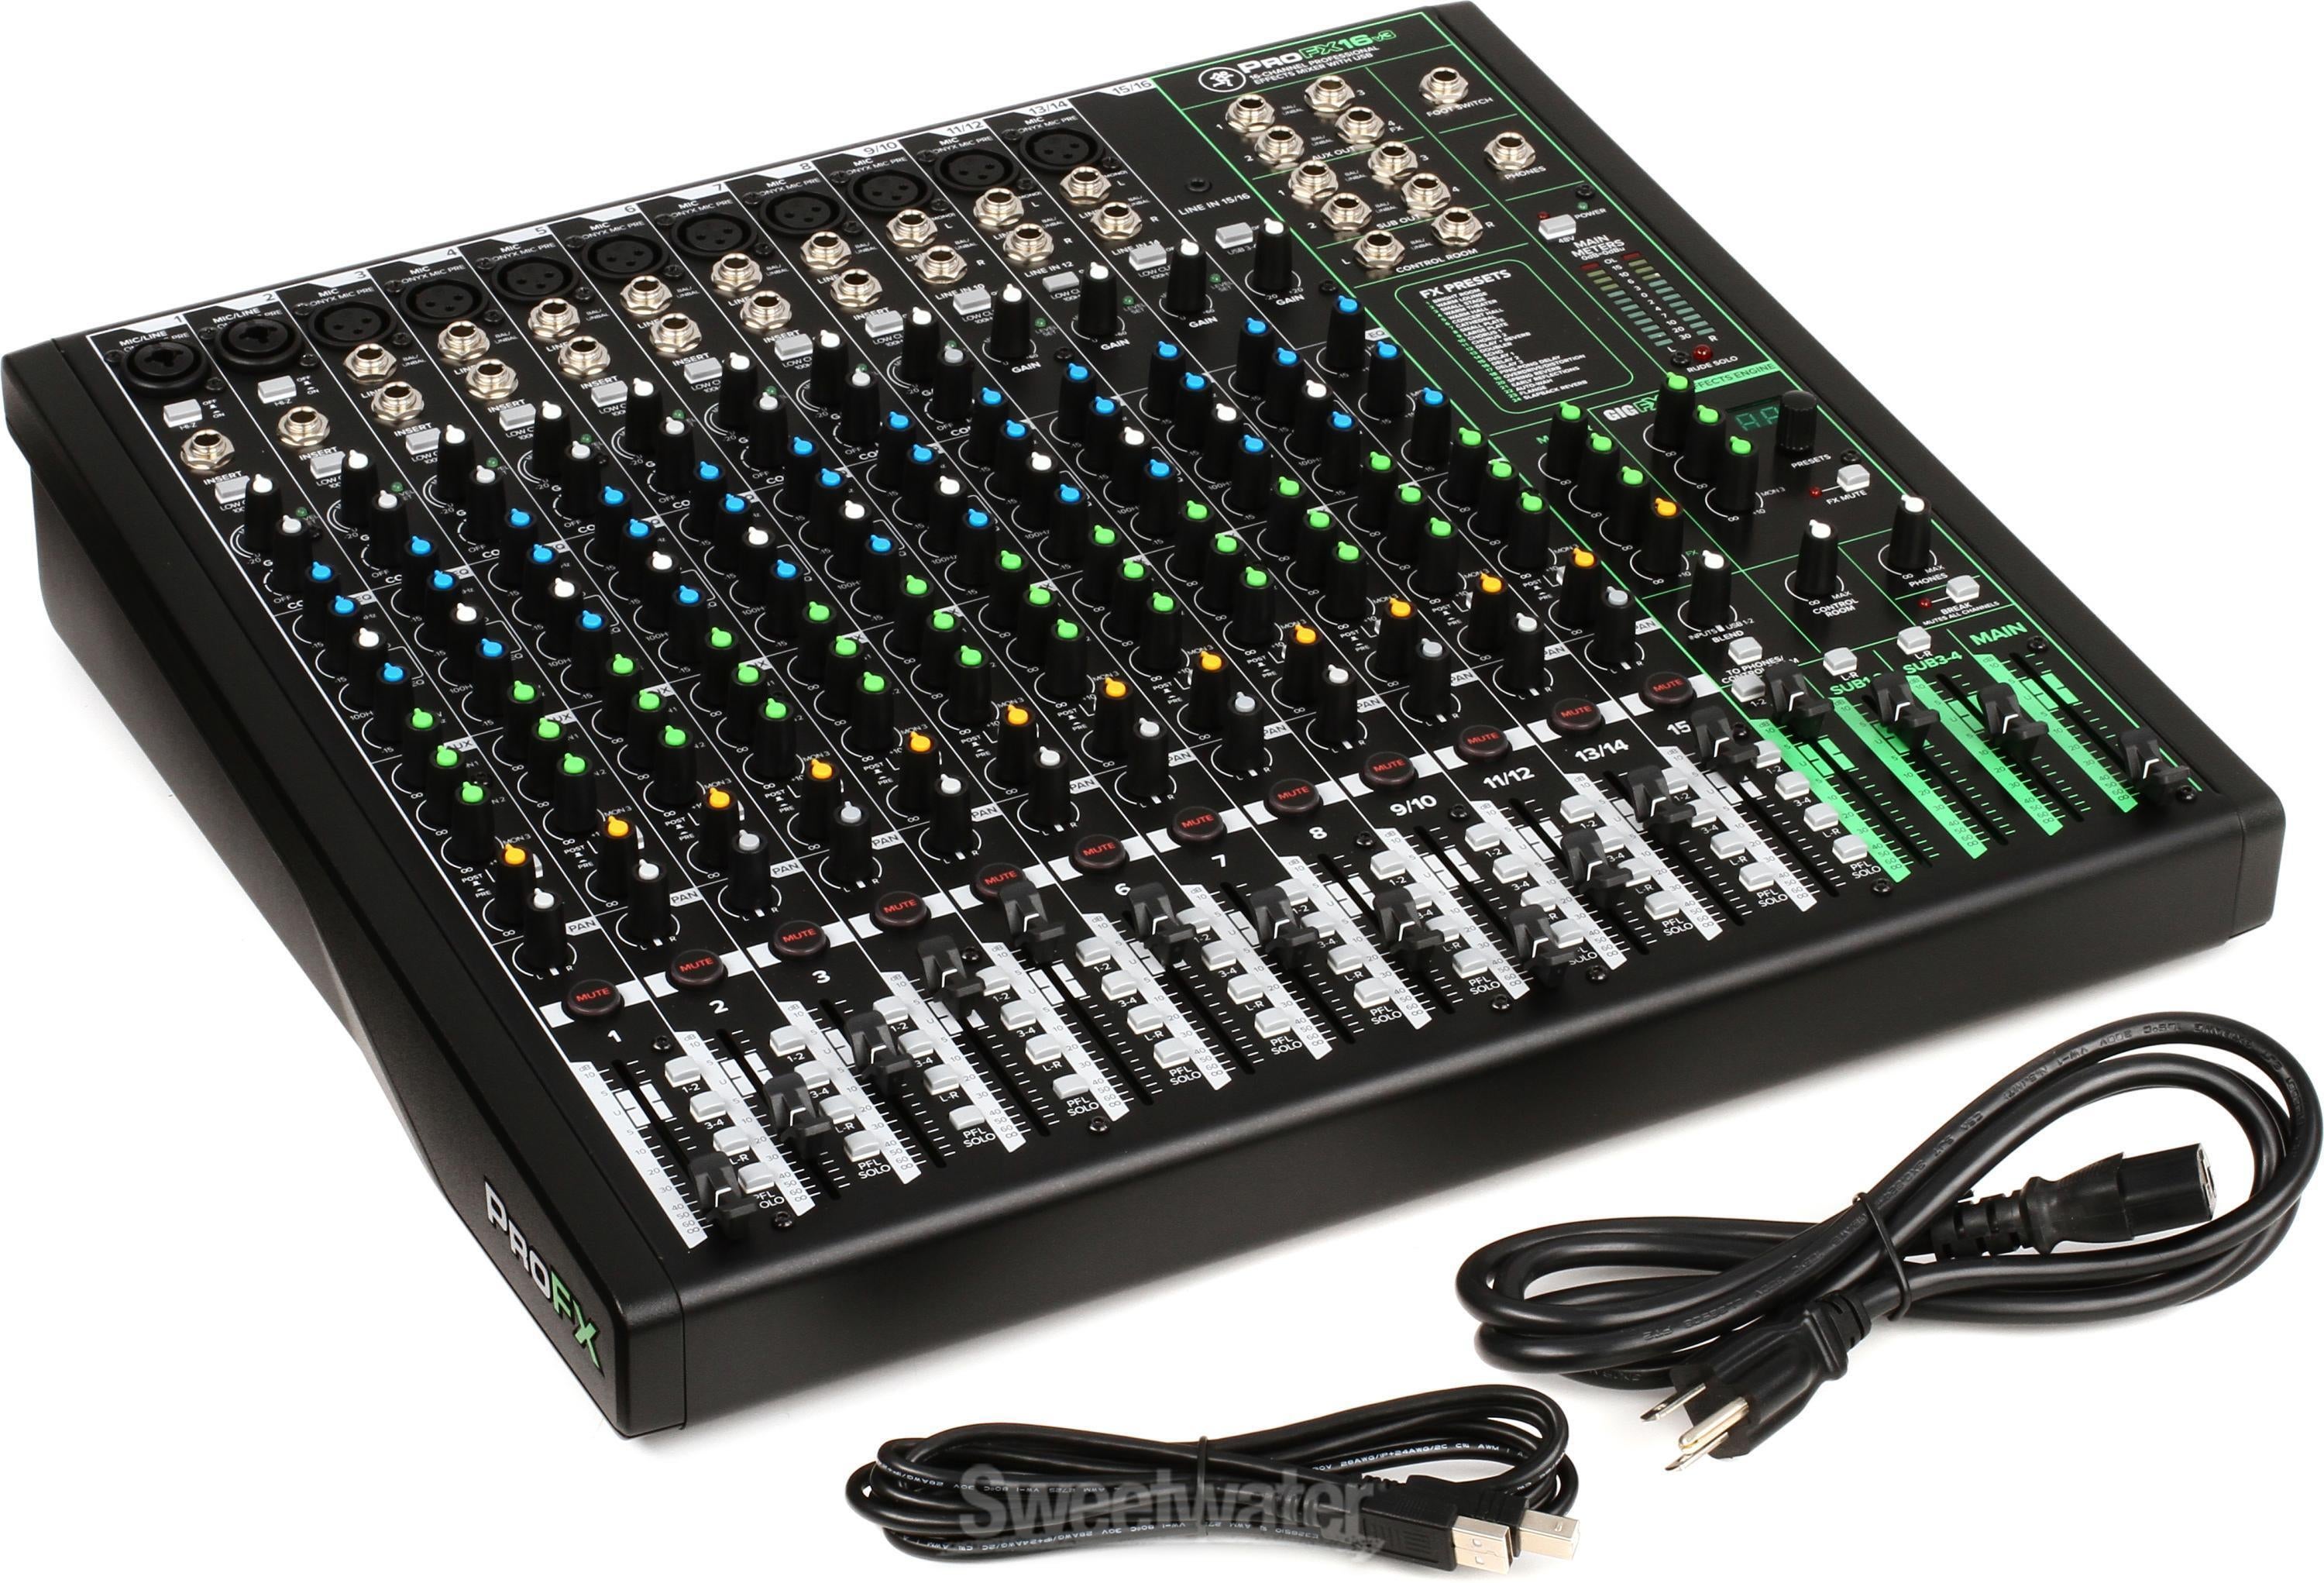 Mackie ProFX16v3 16-channel Mixer with USB and Effects | Sweetwater